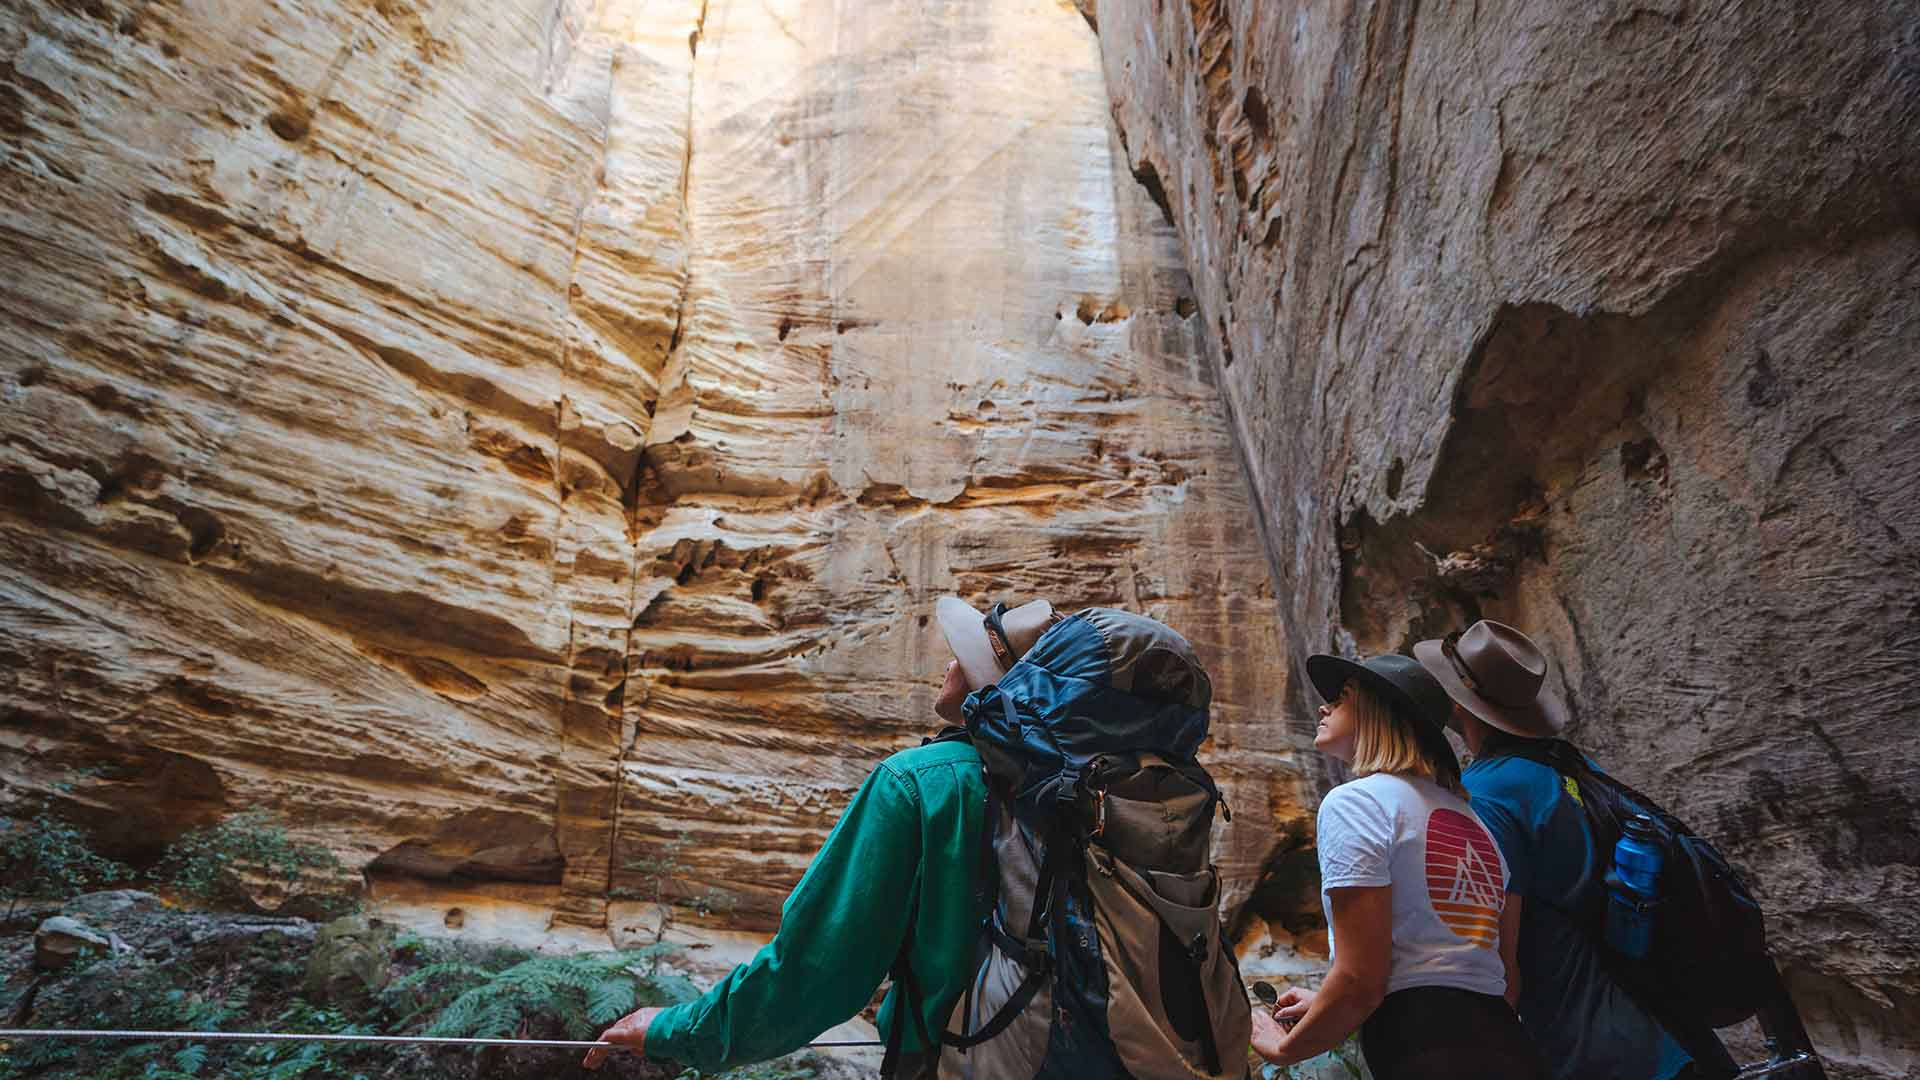 Three people looking up towards an opening in a cave